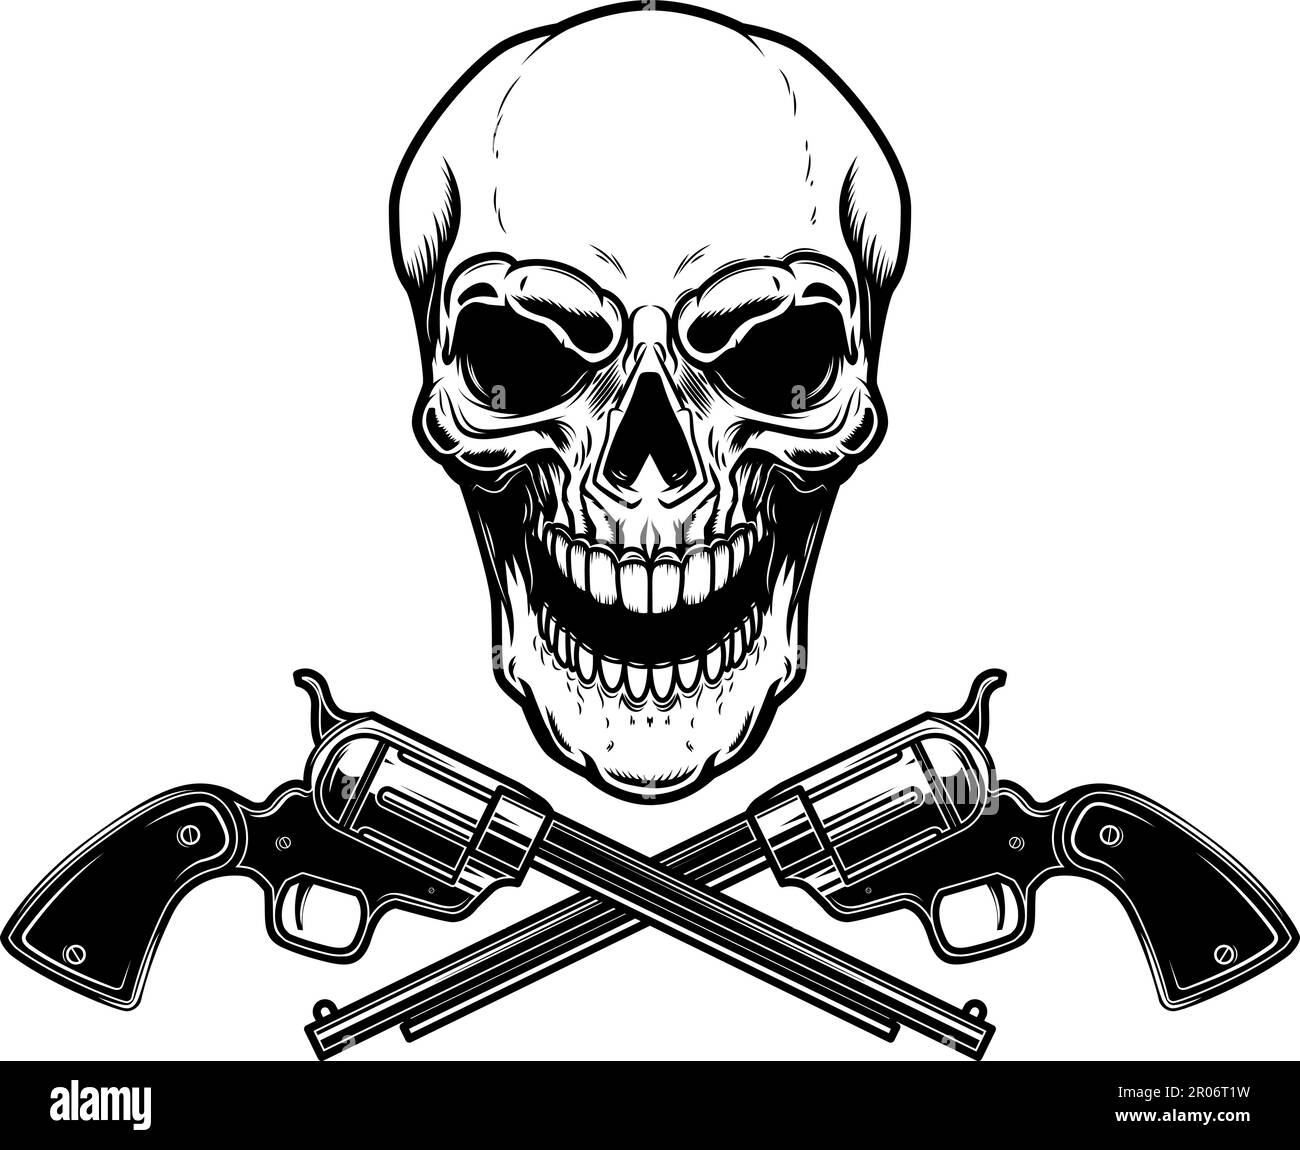 Illustration of the cowboy skull with crossed revolvers. Design element for logo, label, sign, emblem. Vector illustration, Illustration of the cowboy Stock Vector